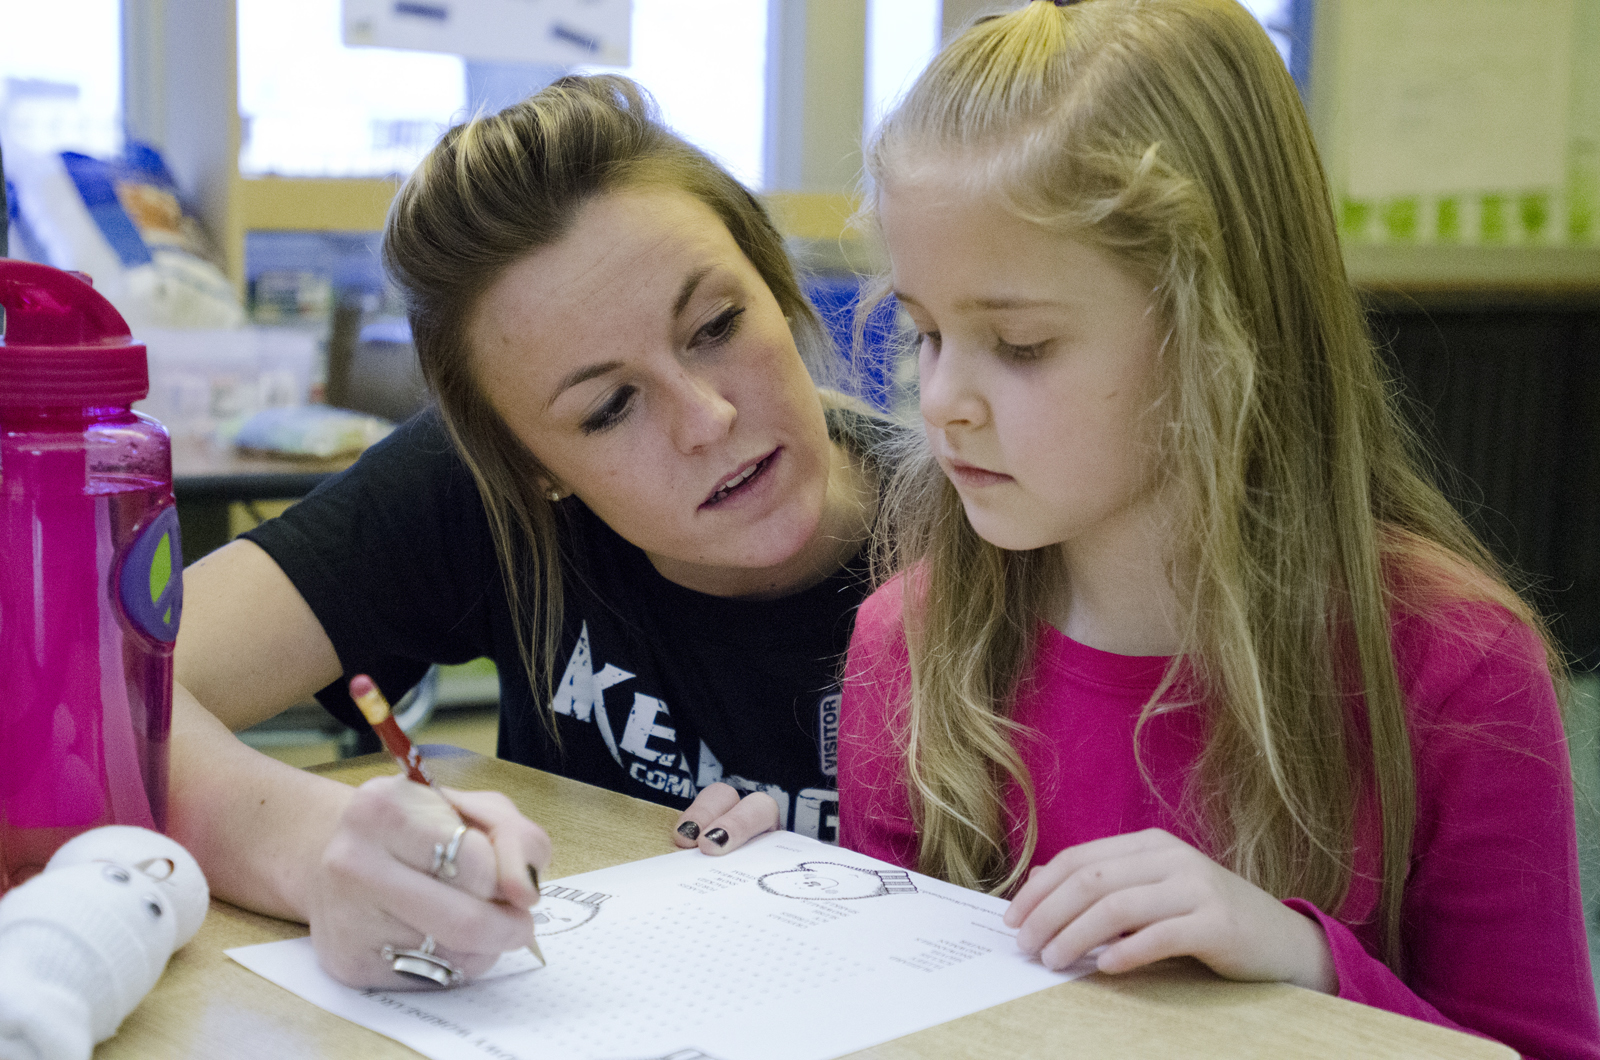 Mackenzie Kendall, 19, a centerfielder studying early childhood special education at KCC, helps a second grader with a worksheet.